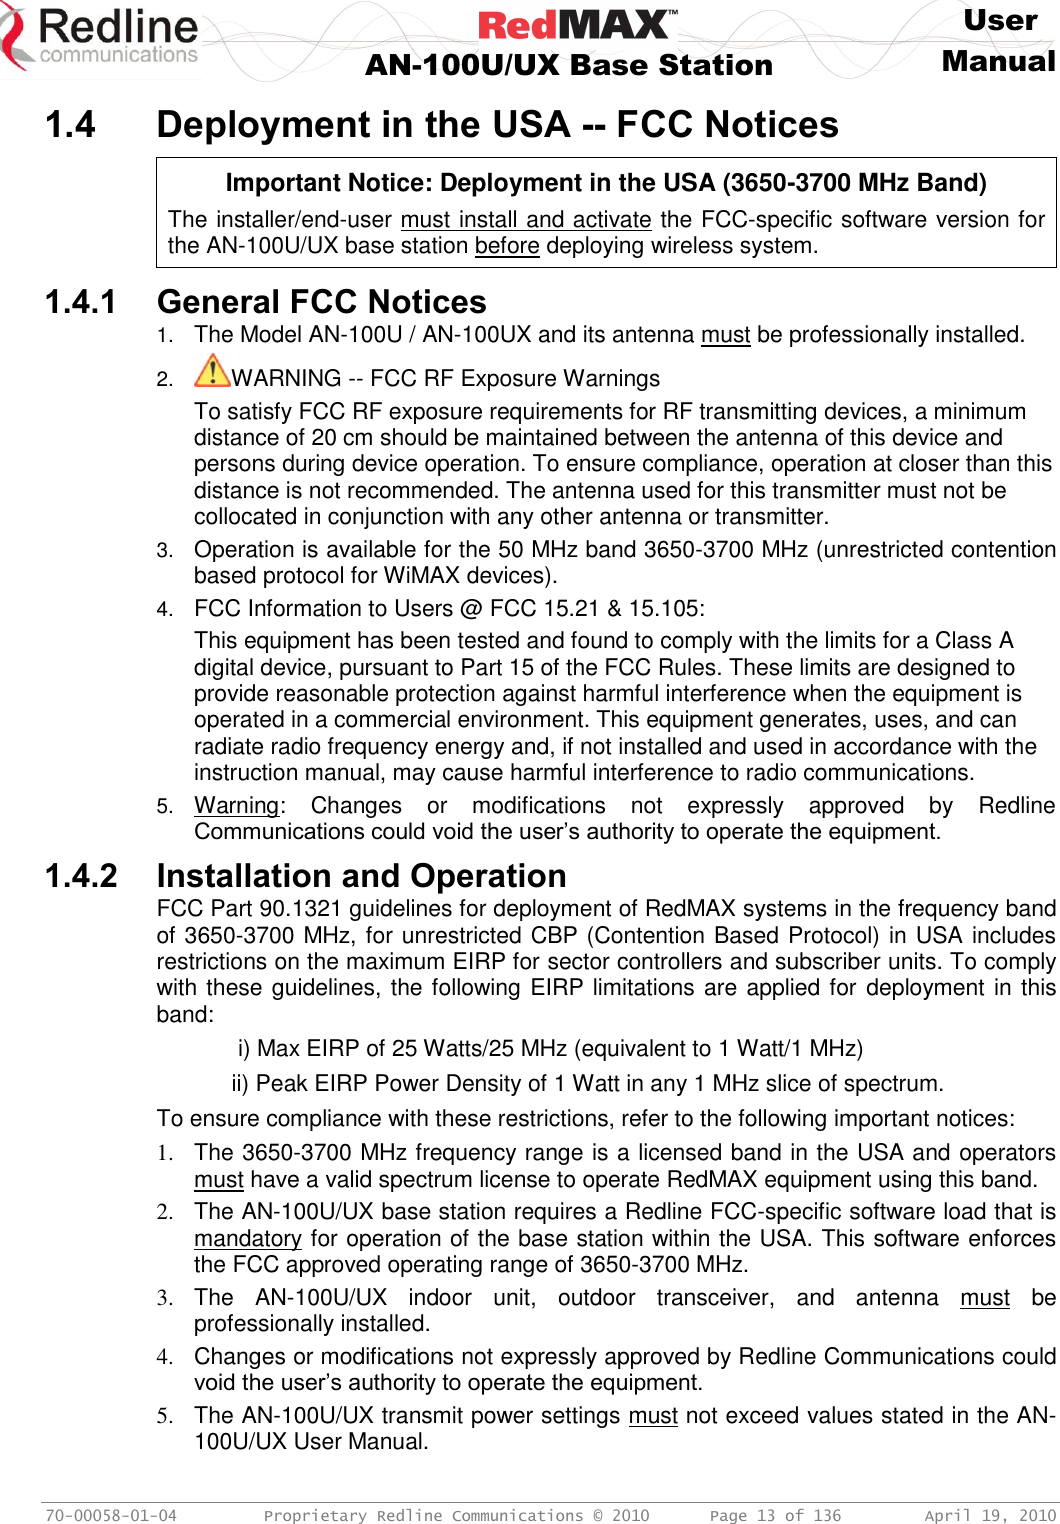     User  AN-100U/UX Base Station Manual   70-00058-01-04  Proprietary Redline Communications © 2010   Page 13 of 136  April 19, 2010 1.4 Deployment in the USA -- FCC Notices   Important Notice: Deployment in the USA (3650-3700 MHz Band) The installer/end-user must install and activate the FCC-specific software version for the AN-100U/UX base station before deploying wireless system.  1.4.1 General FCC Notices 1. The Model AN-100U / AN-100UX and its antenna must be professionally installed. 2. WARNING -- FCC RF Exposure Warnings To satisfy FCC RF exposure requirements for RF transmitting devices, a minimum distance of 20 cm should be maintained between the antenna of this device and persons during device operation. To ensure compliance, operation at closer than this distance is not recommended. The antenna used for this transmitter must not be collocated in conjunction with any other antenna or transmitter. 3. Operation is available for the 50 MHz band 3650-3700 MHz (unrestricted contention based protocol for WiMAX devices). 4. FCC Information to Users @ FCC 15.21 &amp; 15.105: This equipment has been tested and found to comply with the limits for a Class A digital device, pursuant to Part 15 of the FCC Rules. These limits are designed to provide reasonable protection against harmful interference when the equipment is operated in a commercial environment. This equipment generates, uses, and can radiate radio frequency energy and, if not installed and used in accordance with the instruction manual, may cause harmful interference to radio communications. 5. Warning:  Changes  or  modifications  not  expressly  approved  by  Redline Communications could void the user’s authority to operate the equipment. 1.4.2 Installation and Operation FCC Part 90.1321 guidelines for deployment of RedMAX systems in the frequency band of 3650-3700 MHz, for unrestricted CBP (Contention Based Protocol) in USA includes restrictions on the maximum EIRP for sector controllers and subscriber units. To comply with these guidelines, the following EIRP limitations are applied for deployment in this band:    i) Max EIRP of 25 Watts/25 MHz (equivalent to 1 Watt/1 MHz)   ii) Peak EIRP Power Density of 1 Watt in any 1 MHz slice of spectrum.  To ensure compliance with these restrictions, refer to the following important notices: 1.  The 3650-3700 MHz frequency range is a licensed band in the USA and operators must have a valid spectrum license to operate RedMAX equipment using this band. 2.  The AN-100U/UX base station requires a Redline FCC-specific software load that is mandatory for operation of the base station within the USA. This software enforces the FCC approved operating range of 3650-3700 MHz. 3.  The  AN-100U/UX  indoor  unit,  outdoor  transceiver,  and  antenna  must  be professionally installed. 4.  Changes or modifications not expressly approved by Redline Communications could void the user’s authority to operate the equipment. 5.  The AN-100U/UX transmit power settings must not exceed values stated in the AN-100U/UX User Manual. 